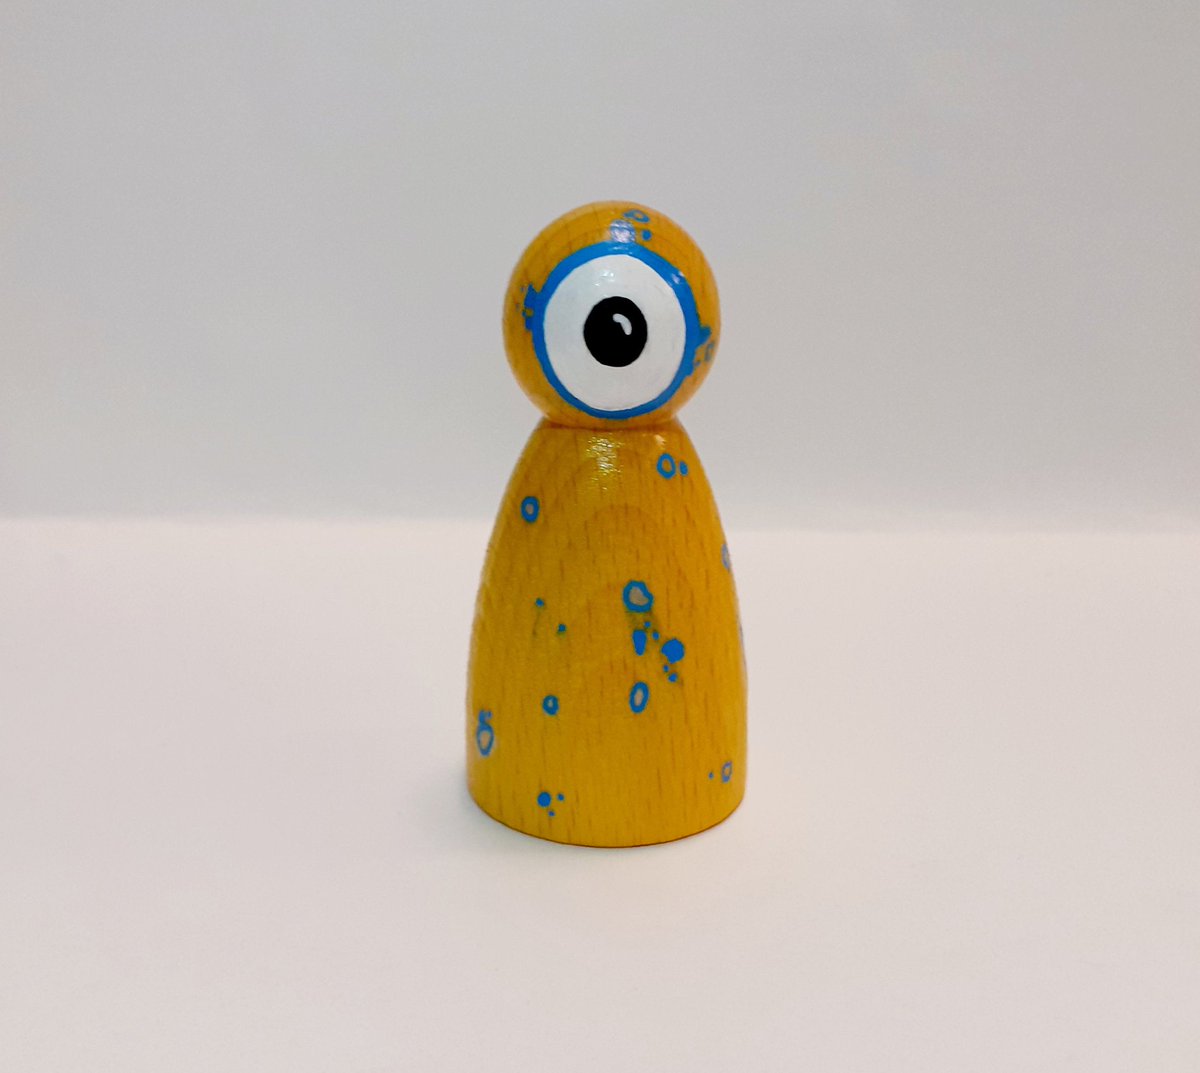 Excited to share the latest addition to my #etsy shop: Peg Doll - Alien / Monster - yellow with blue spots - natural wooden toy small world pretend play Waldorf space #toys #wooden #woodenplay #woodentoy #waldorf #natural #ecotoy #handmade etsy.me/36NdMN2